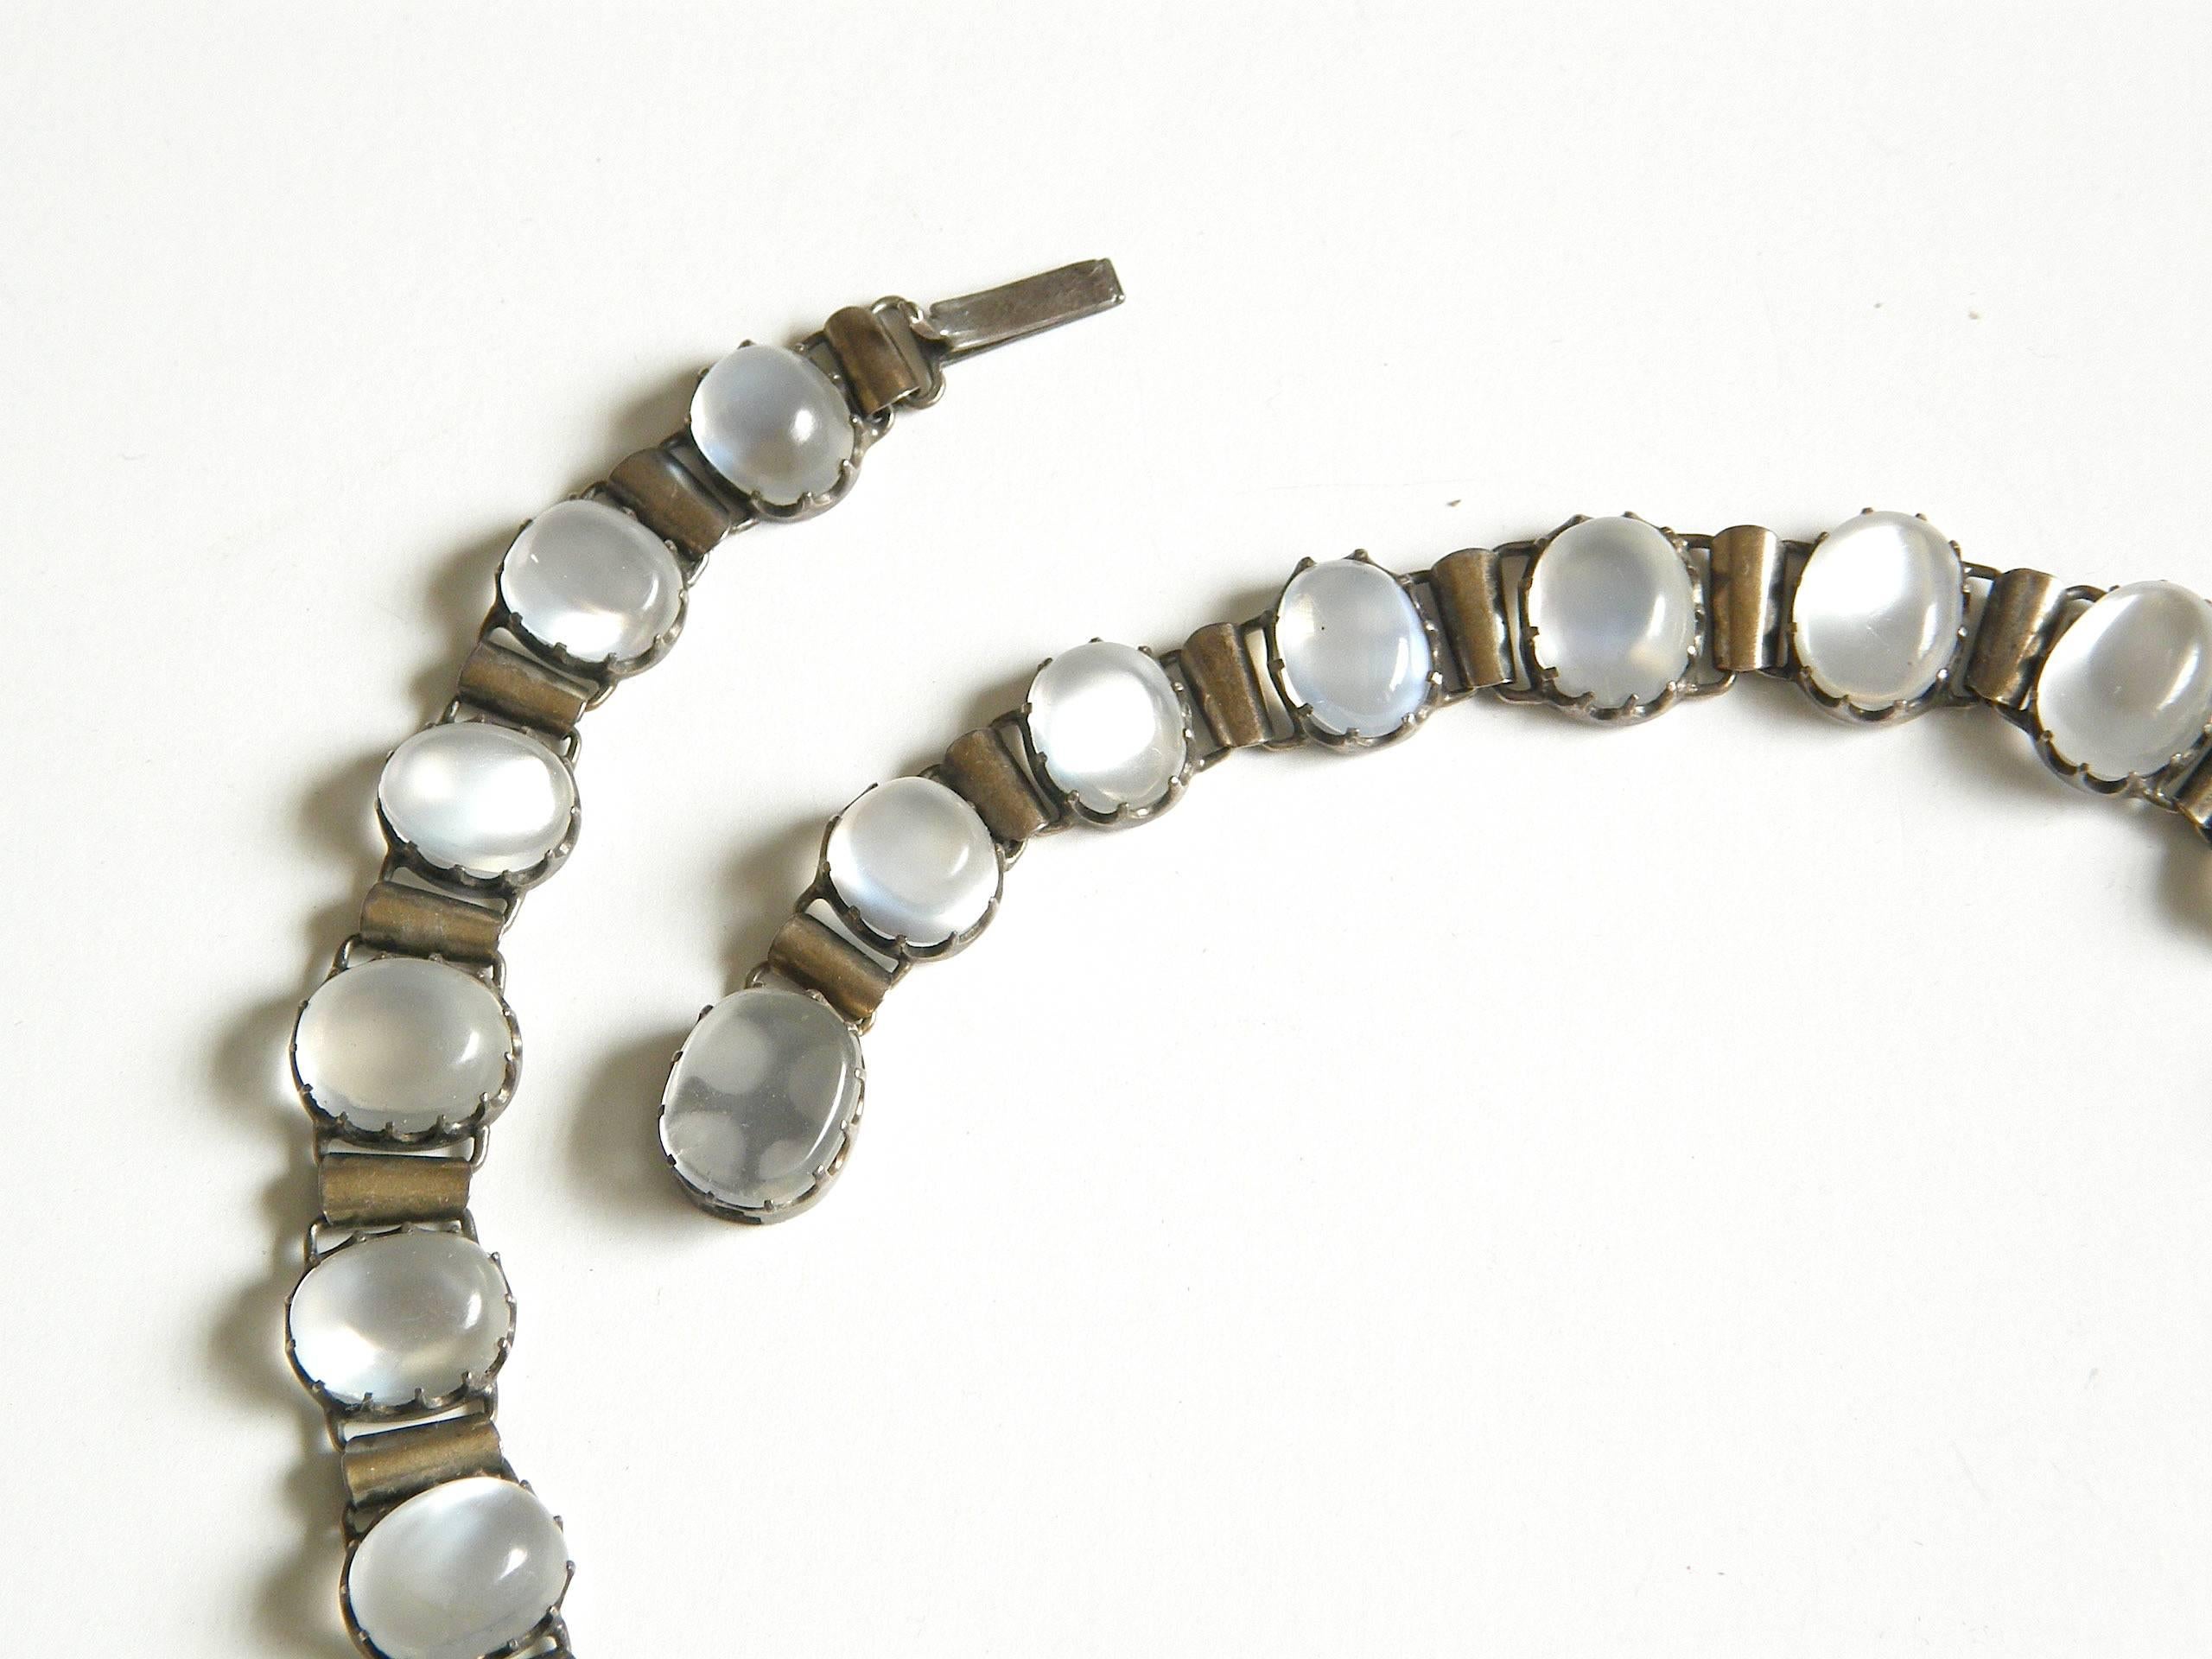 Women's Sterling Choker Necklace Links Set with Oval Cabochon Moonstones